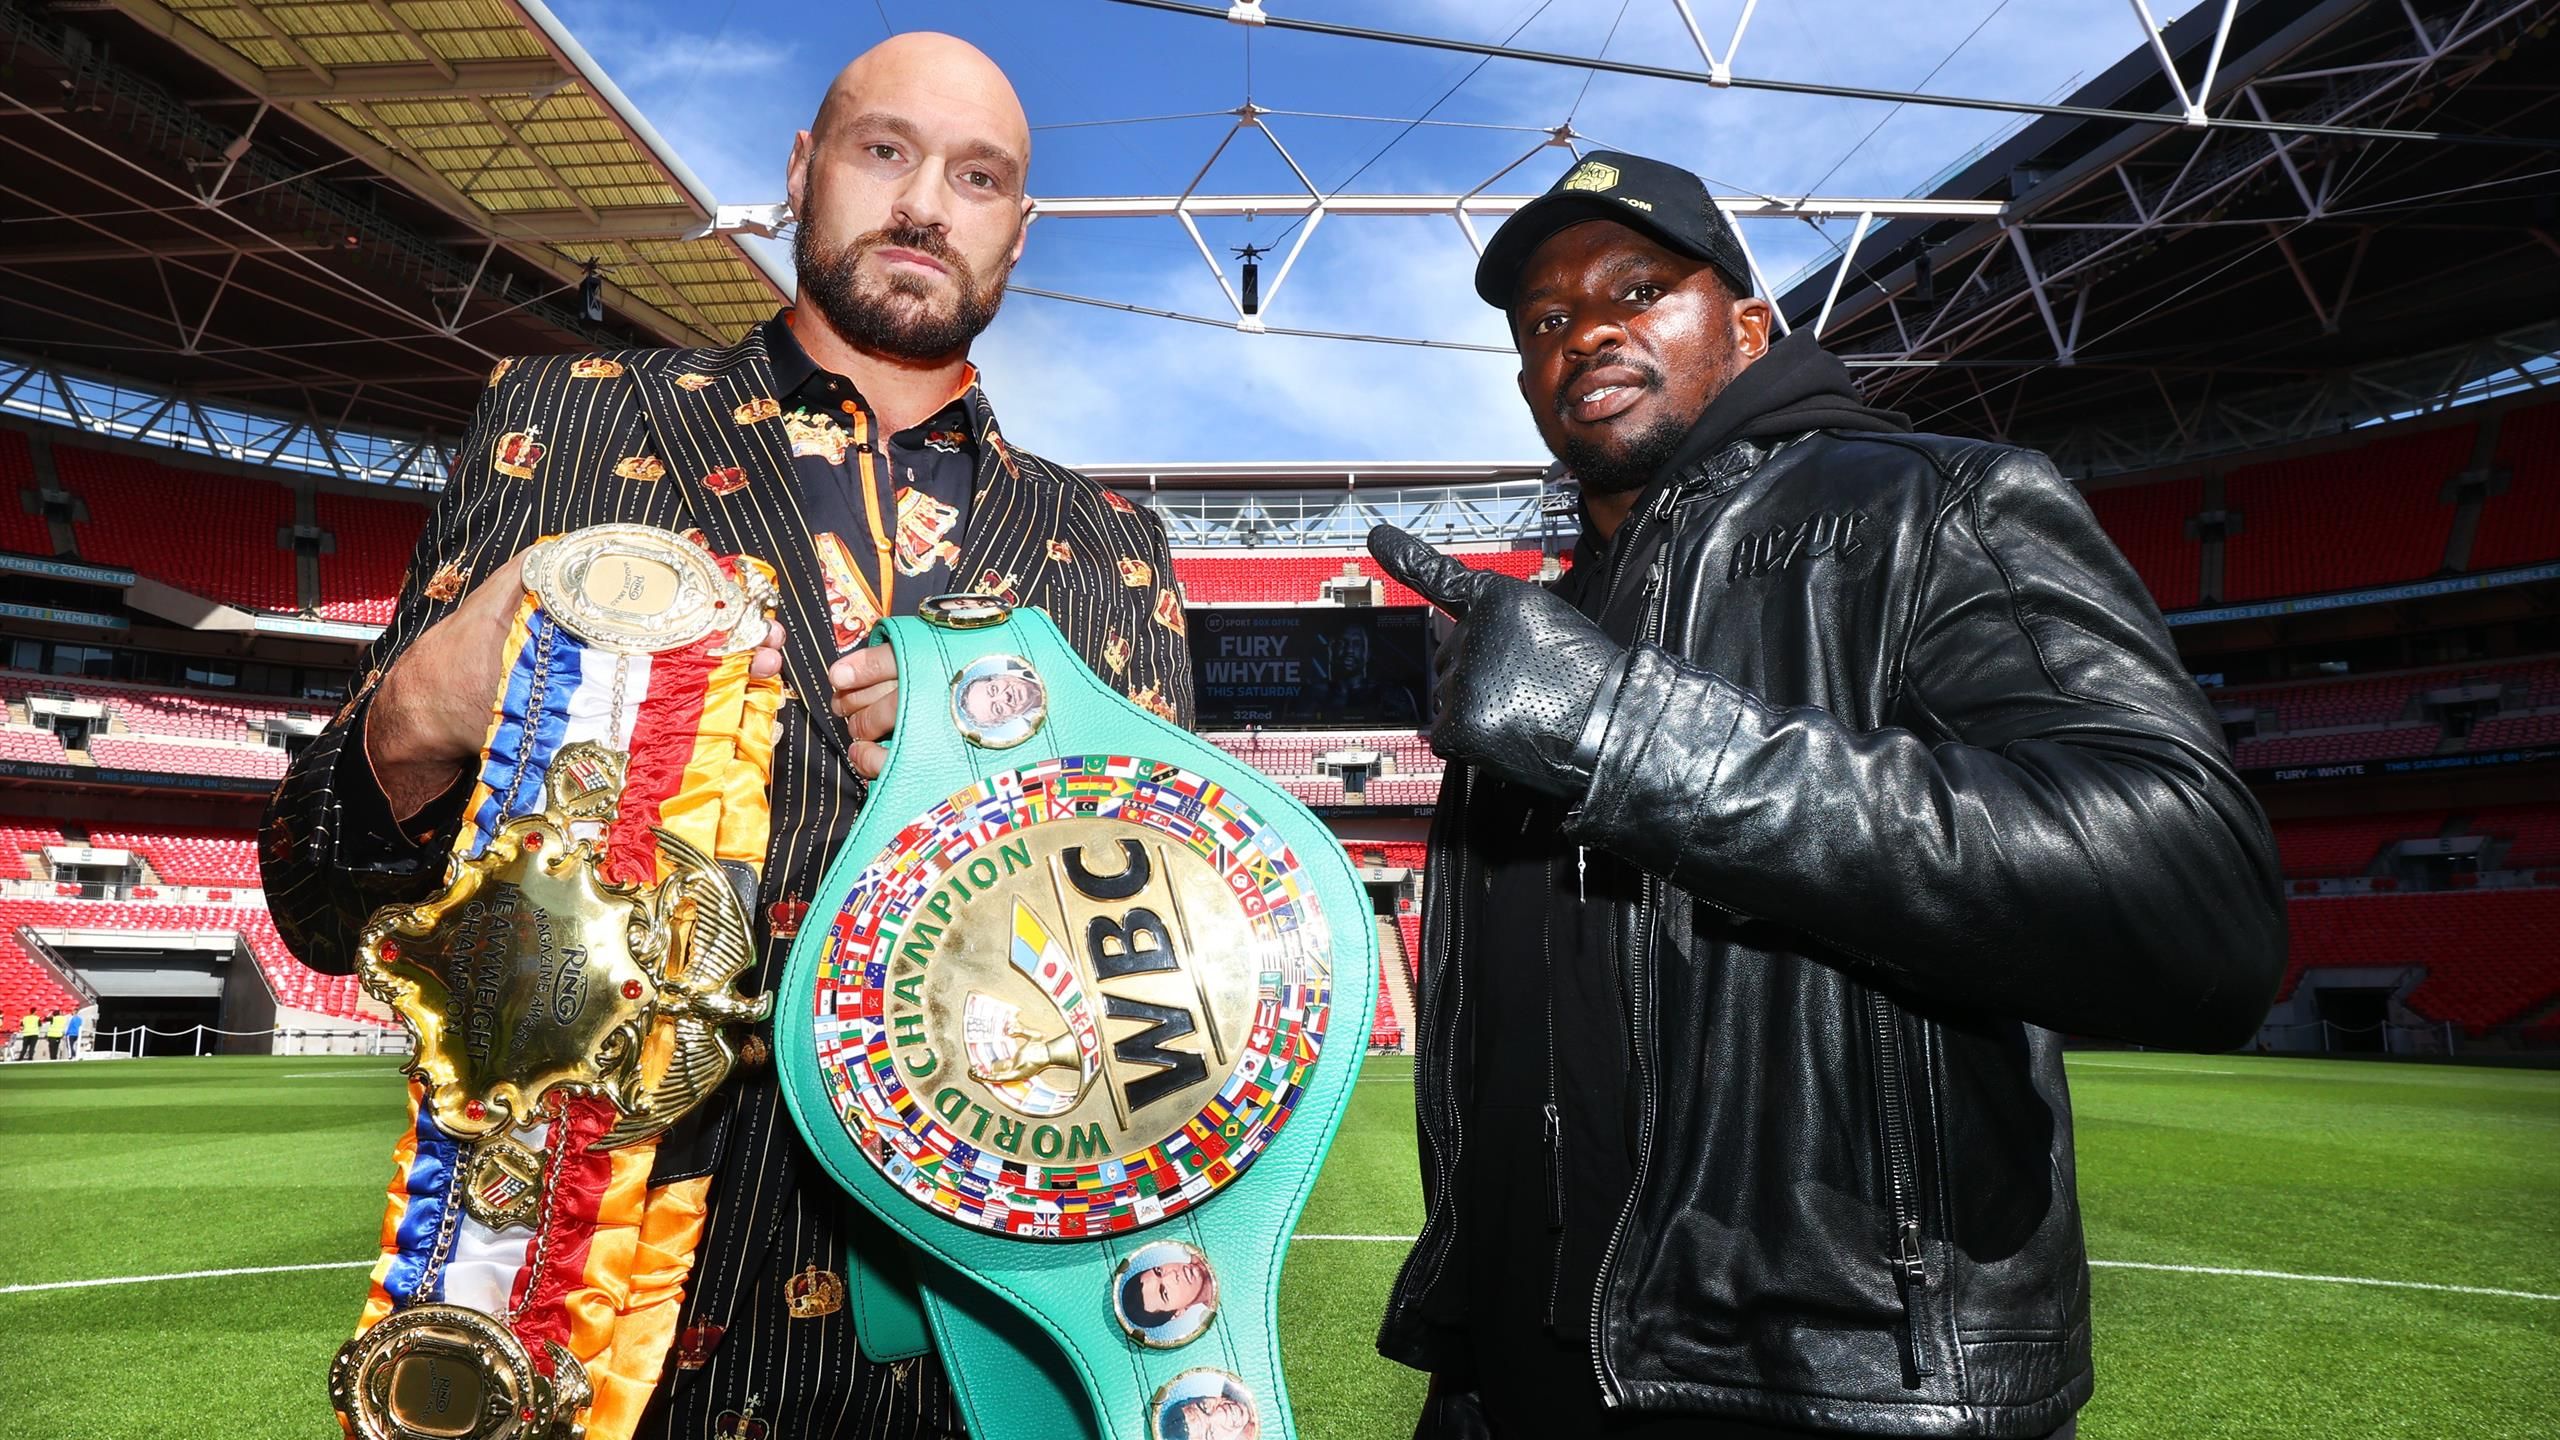 Tyson Fury v Dillian Whyte The road to the biggest British boxing match in history